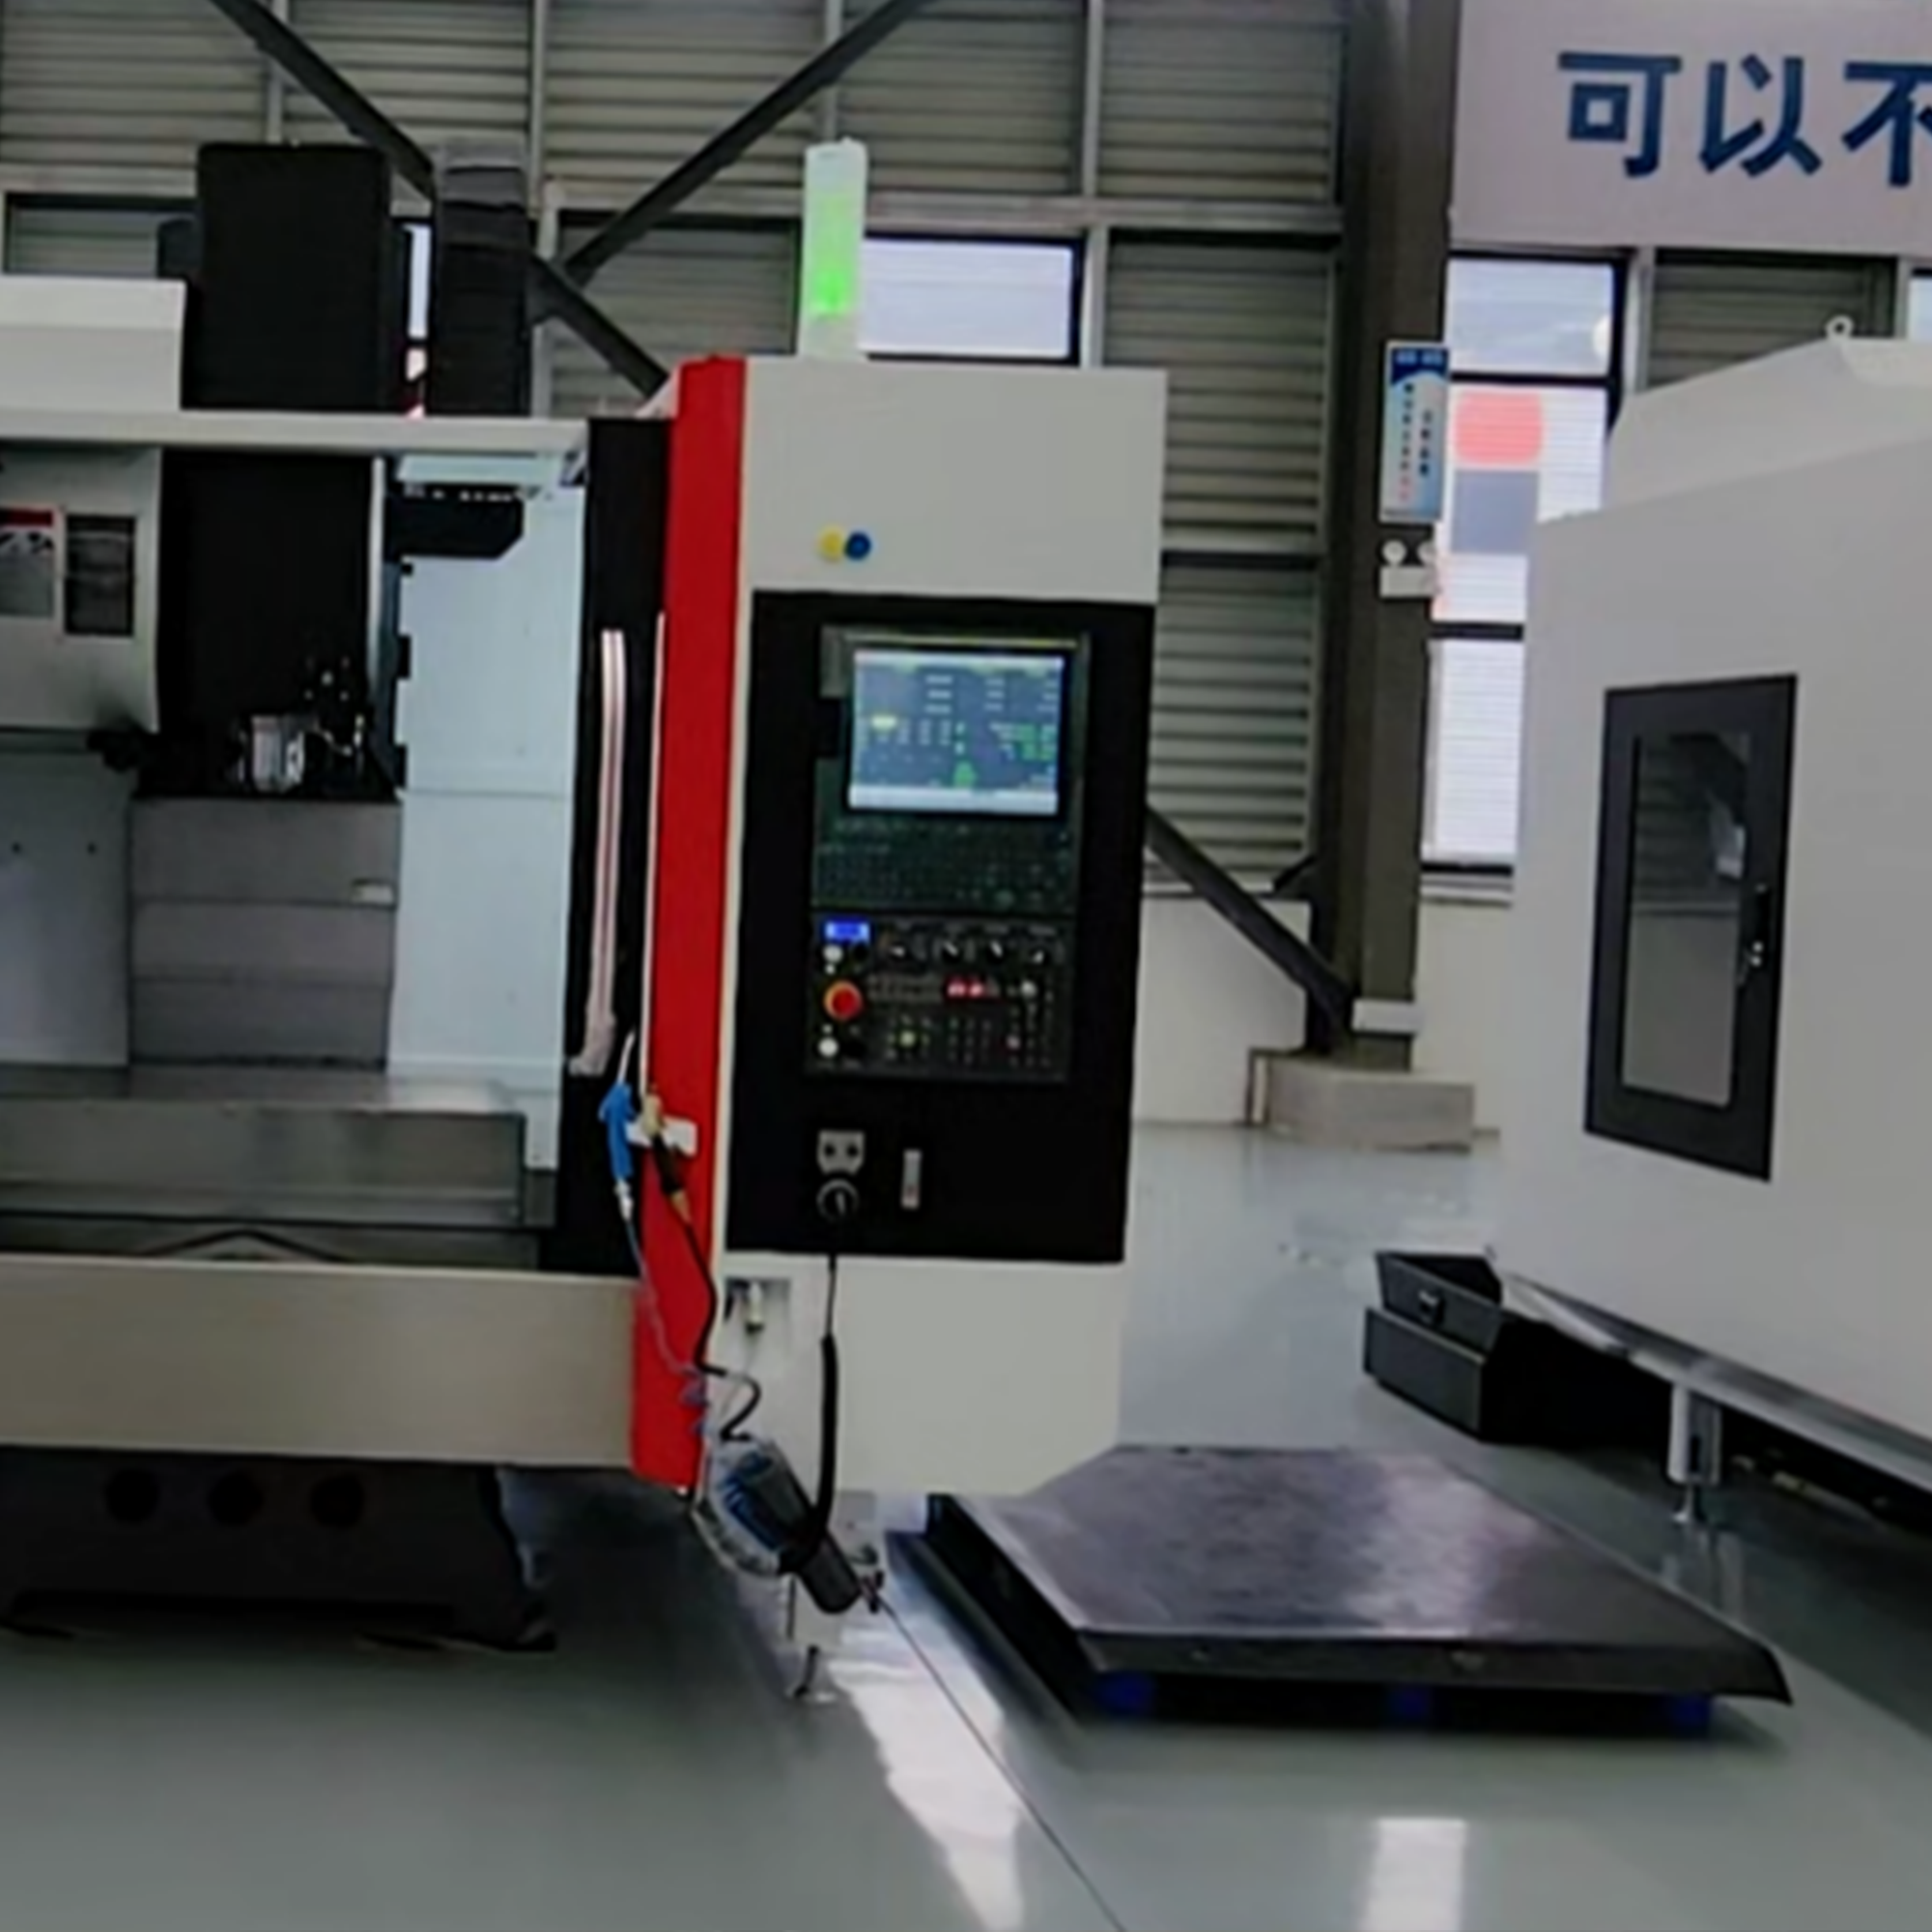 What preparations are required for the movement of the machining center and before operation?